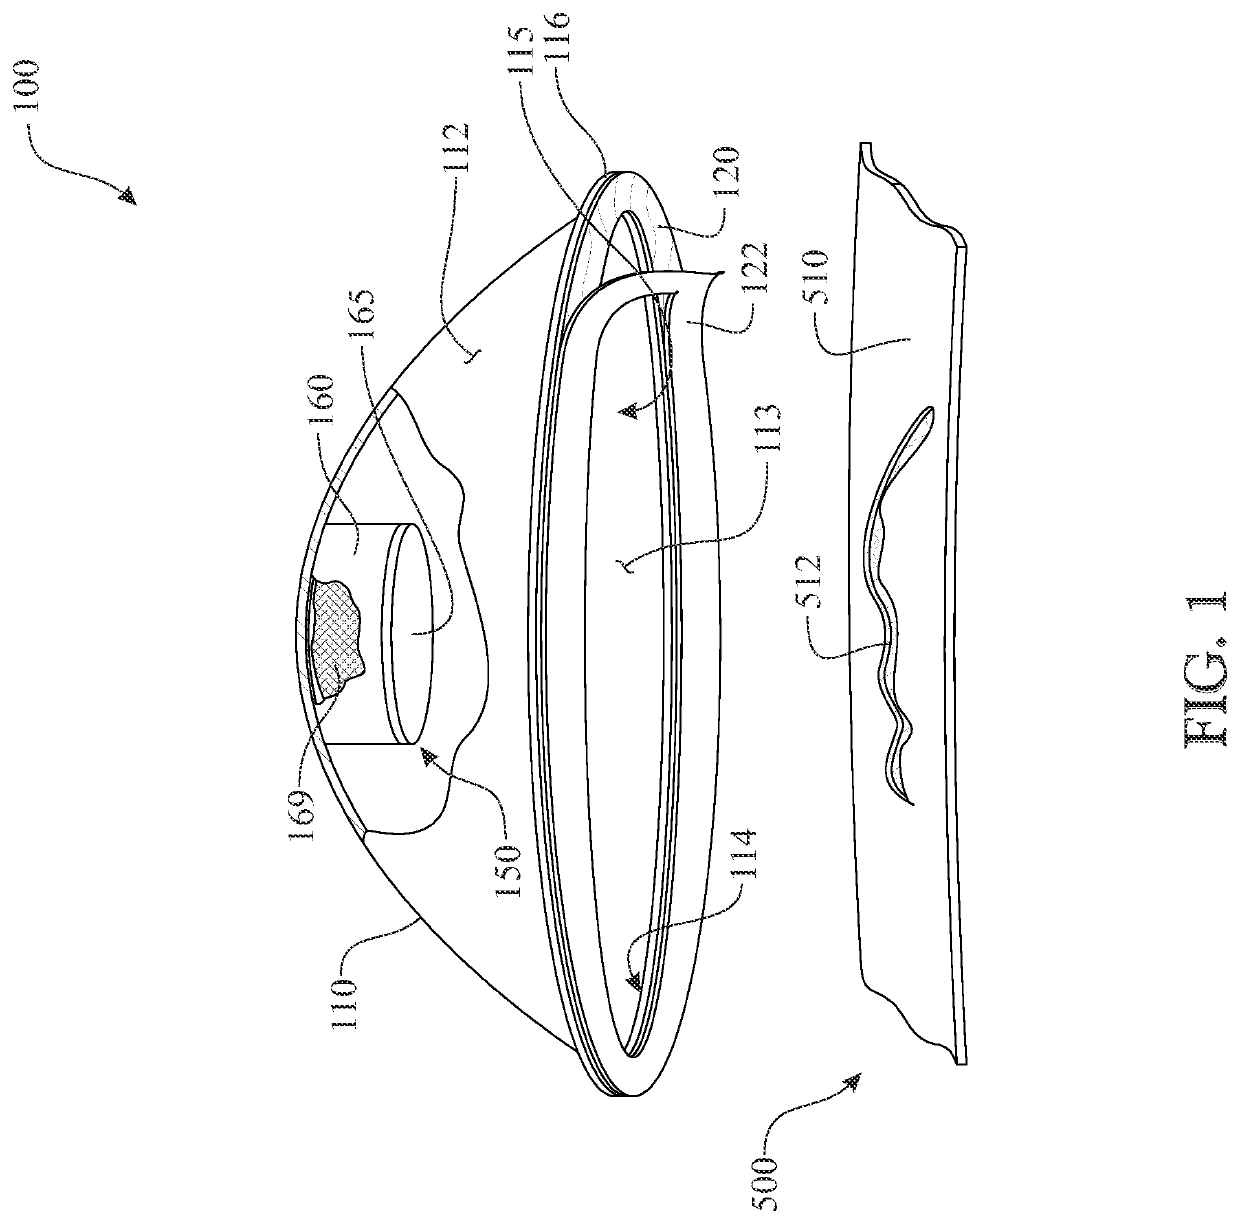 Contactless wound treatment barrier and method of contactless wound treatment